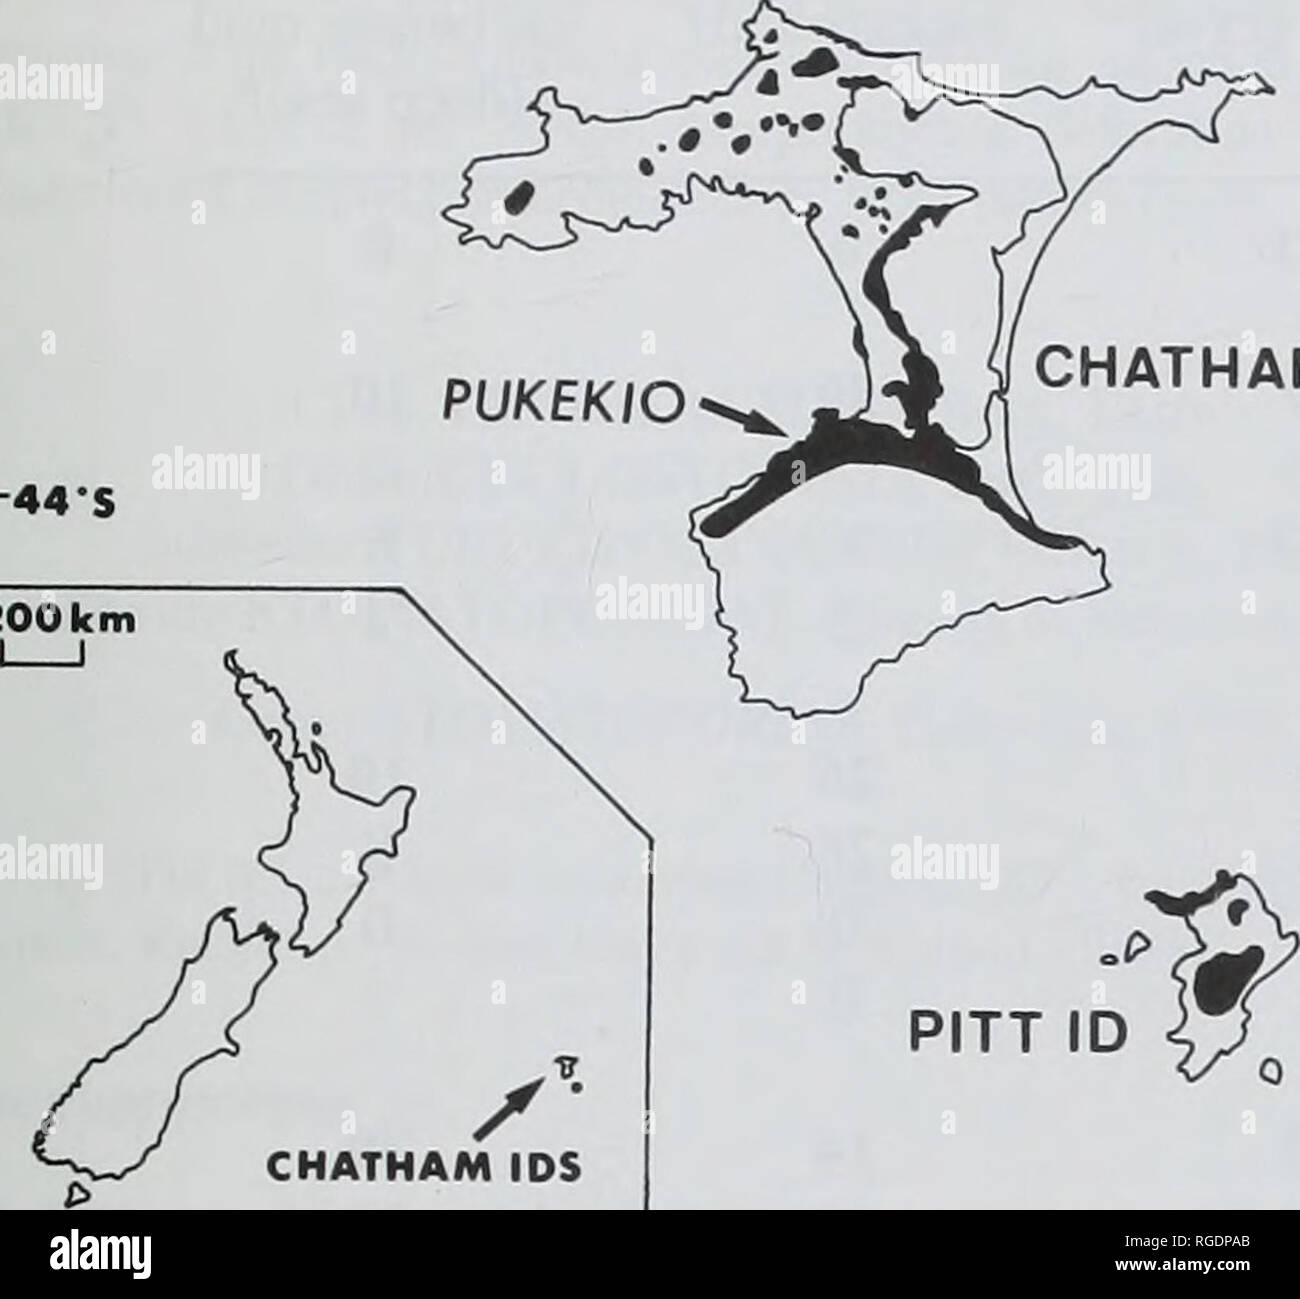 Bulletin Of The Natural Histort Museum Geology Series Bryozoans From Chatham Island I I77w I76 Quot W 10 Km I I Chatham Id 44 S 300 Km Jj Fig 1 Simplified Map Of The